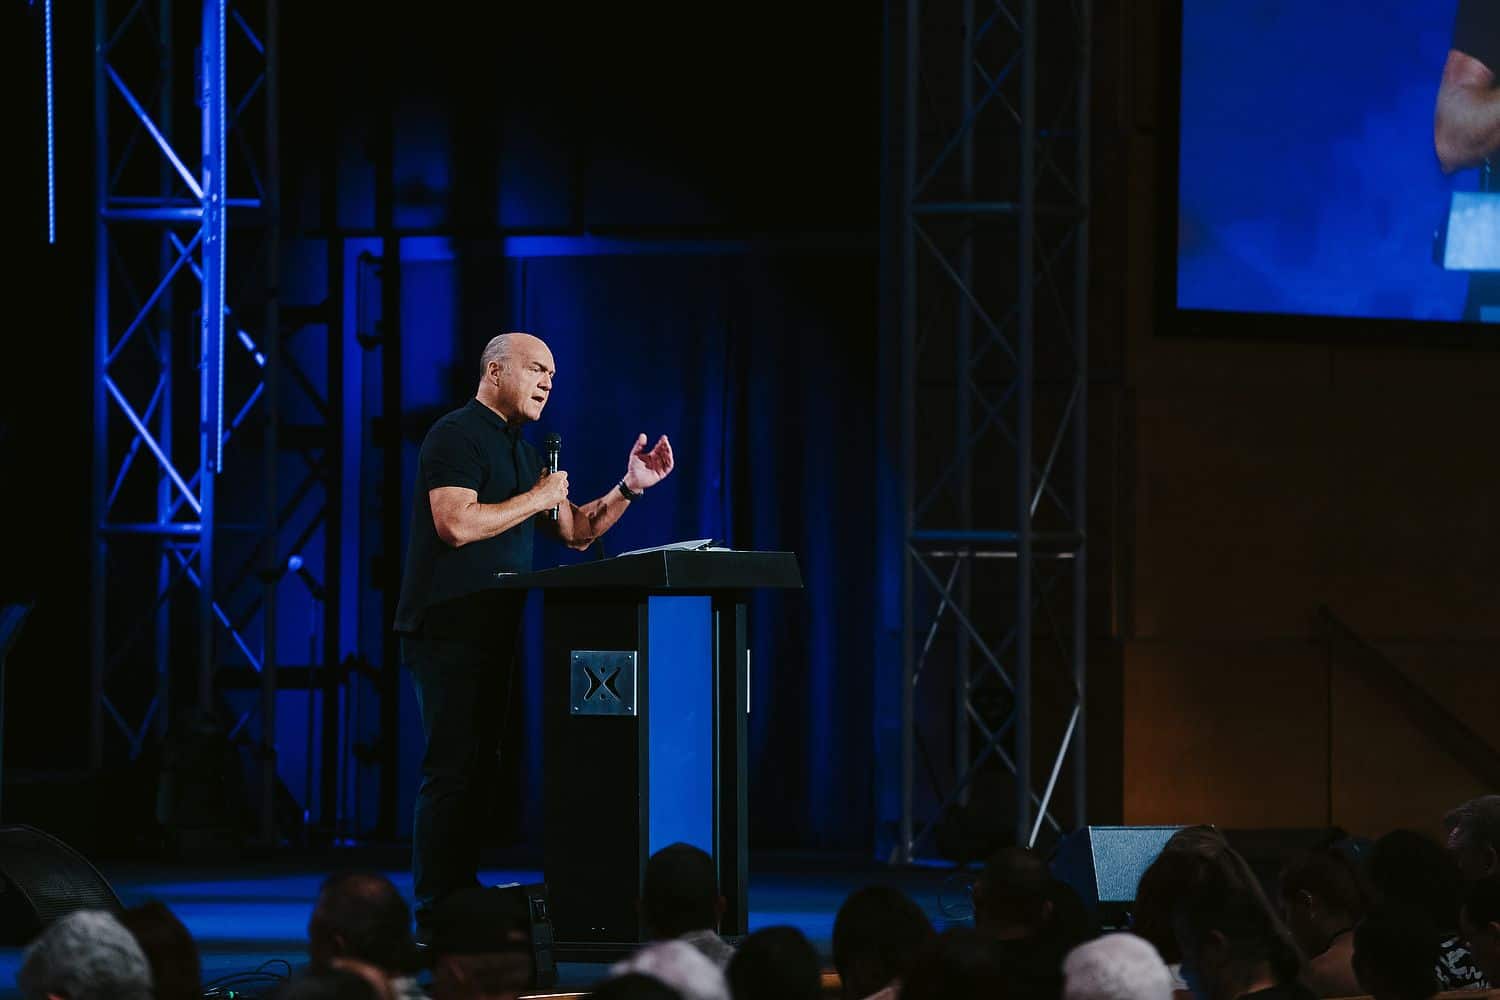 Pastor Greg Laurie shares a message from Romans 15 titled “Hope Is on the Way” in our Sunday Morning" series at Harvest Christian Fellowship.